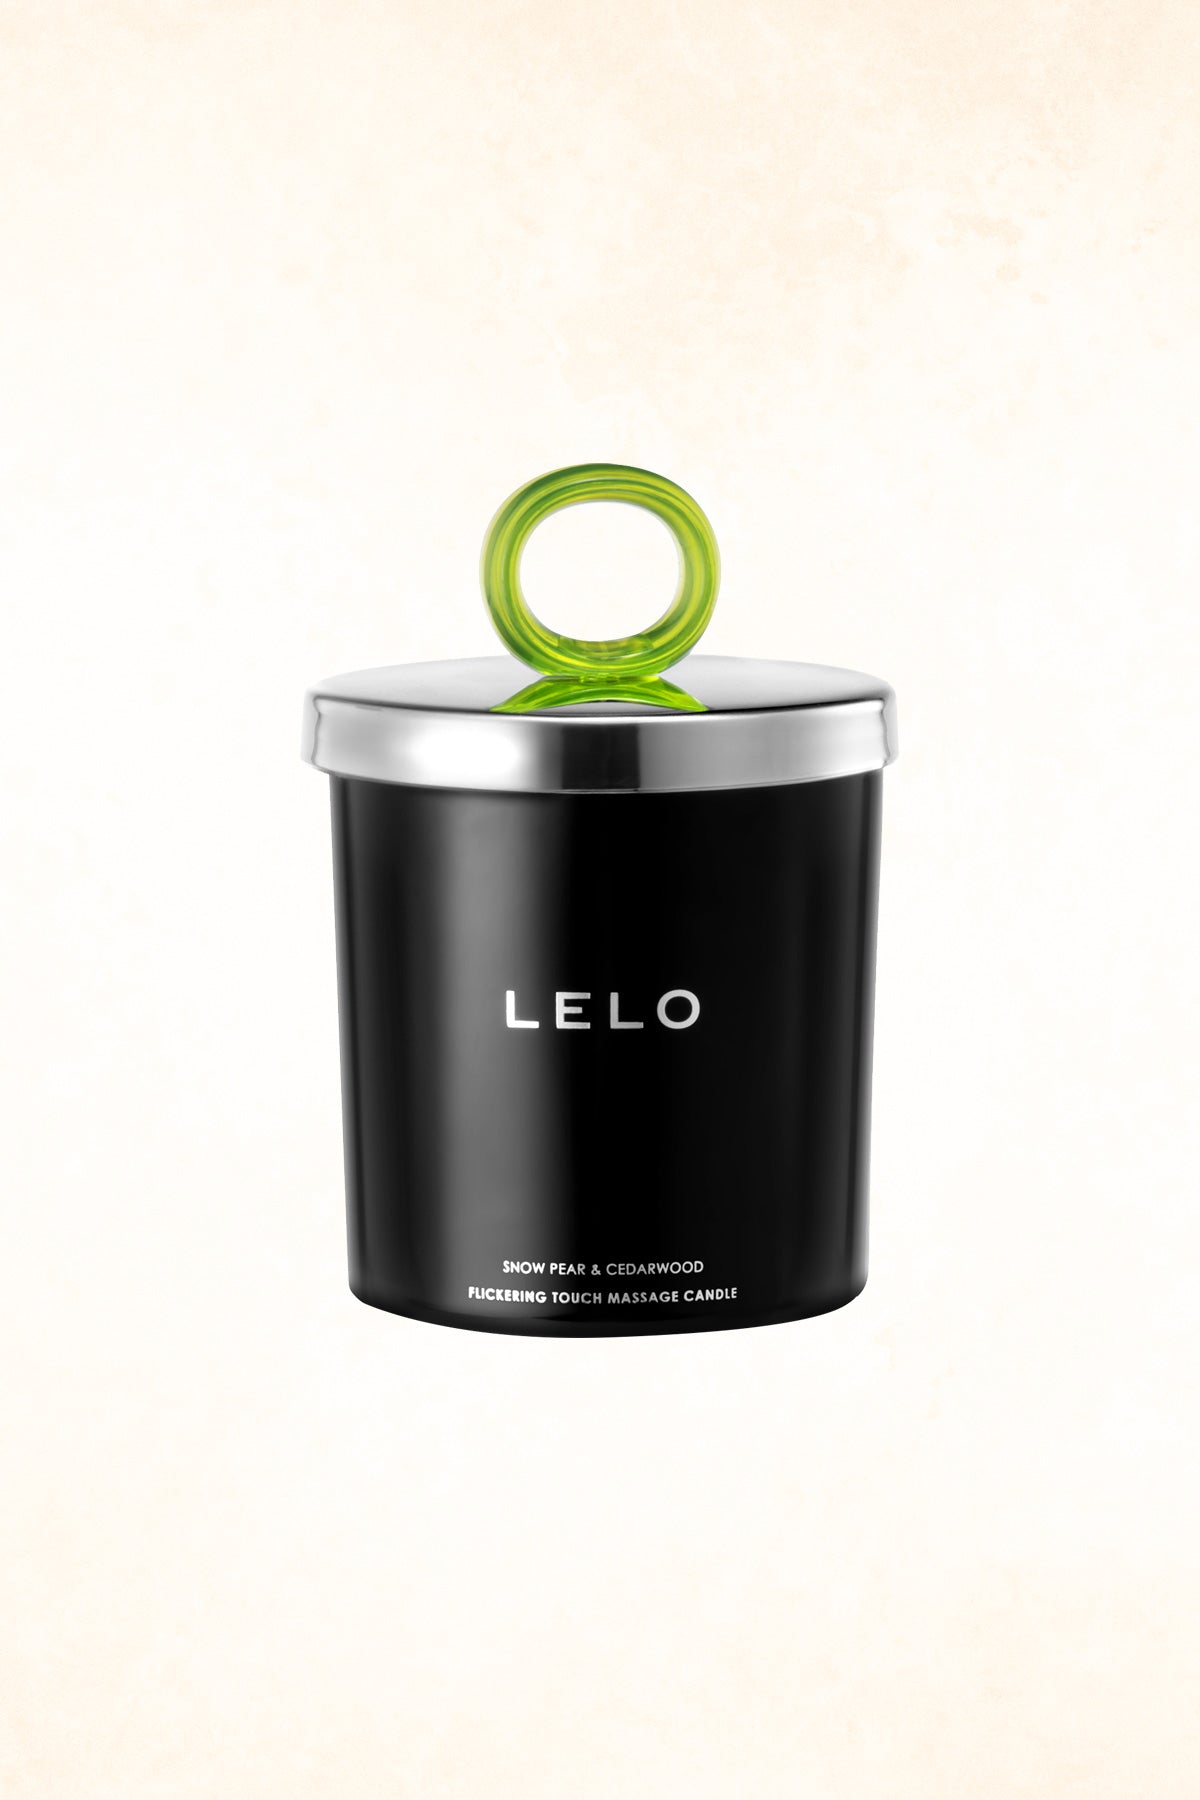 Lelo - Flickering Touch Massage Candle - Snow Pear &amp; Cedarwood